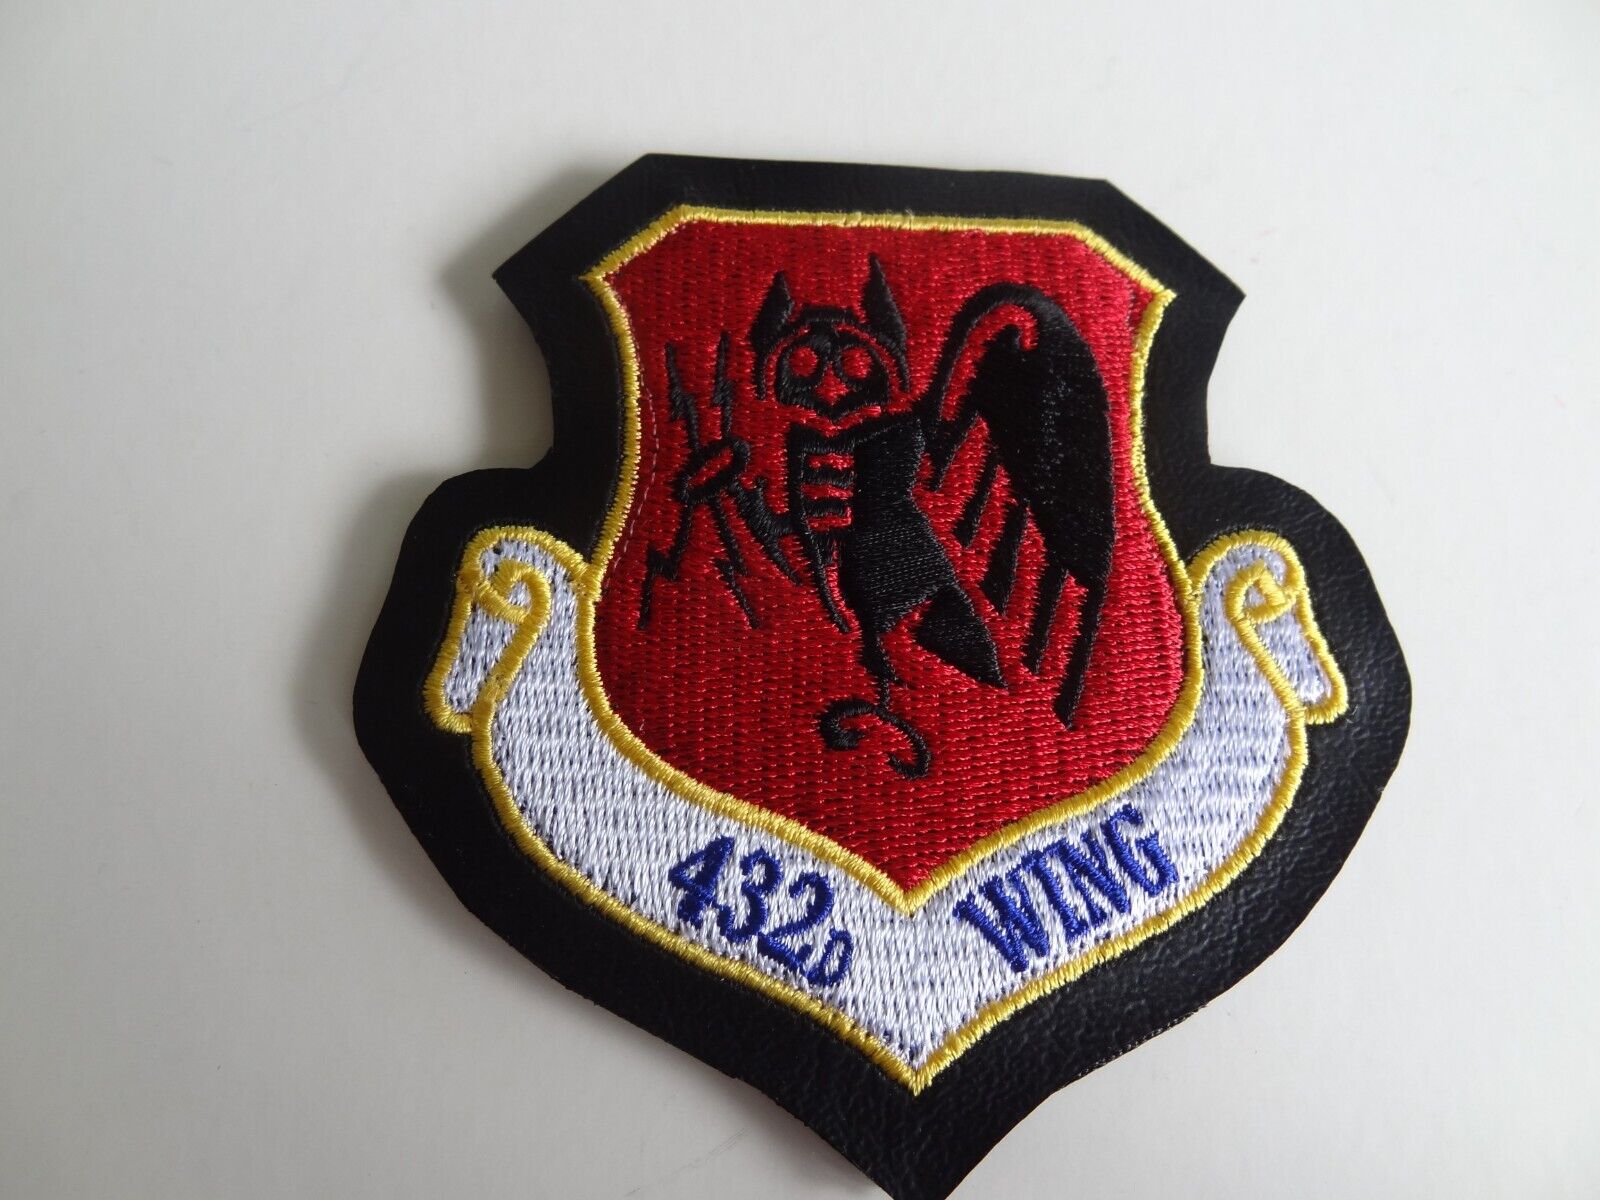 KILLER ELITE AFSOC WAR TROPHY DEATH FROM ABOVE 432D WING INSIGNIA: MQ-9 Reaper